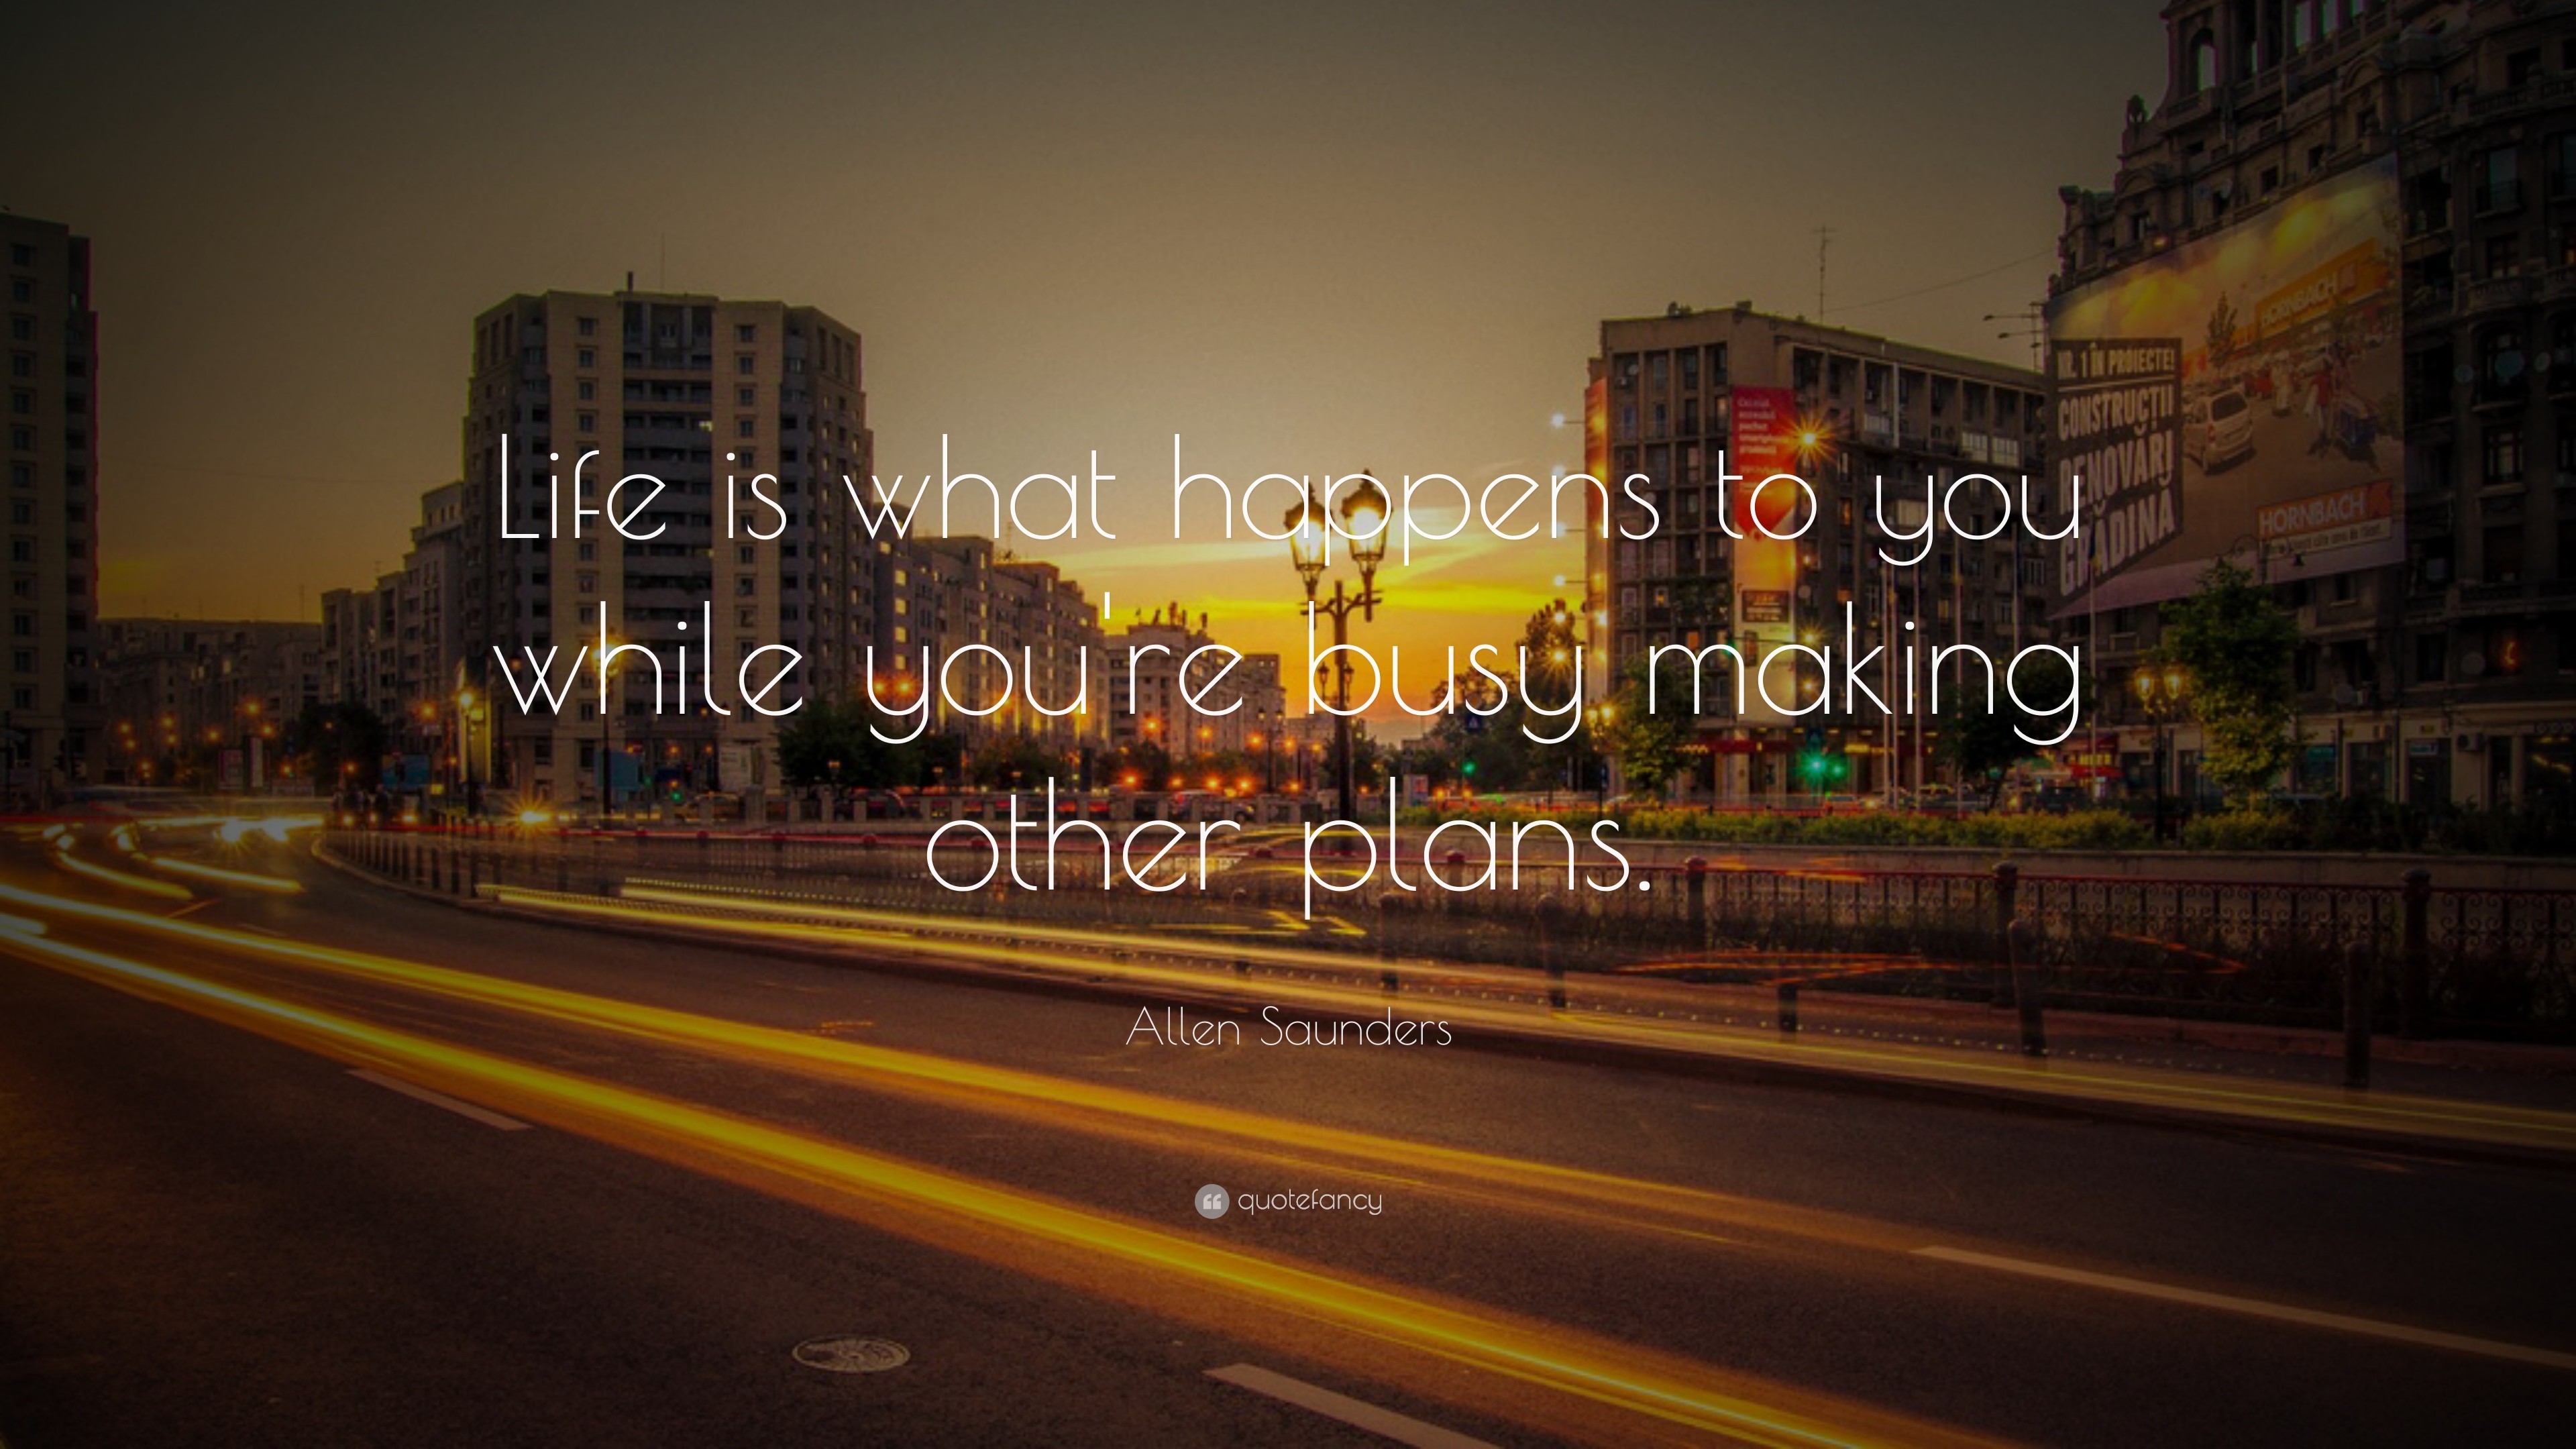 3840x2160 Life Quotes: “Life is what happens to you while you're busy making